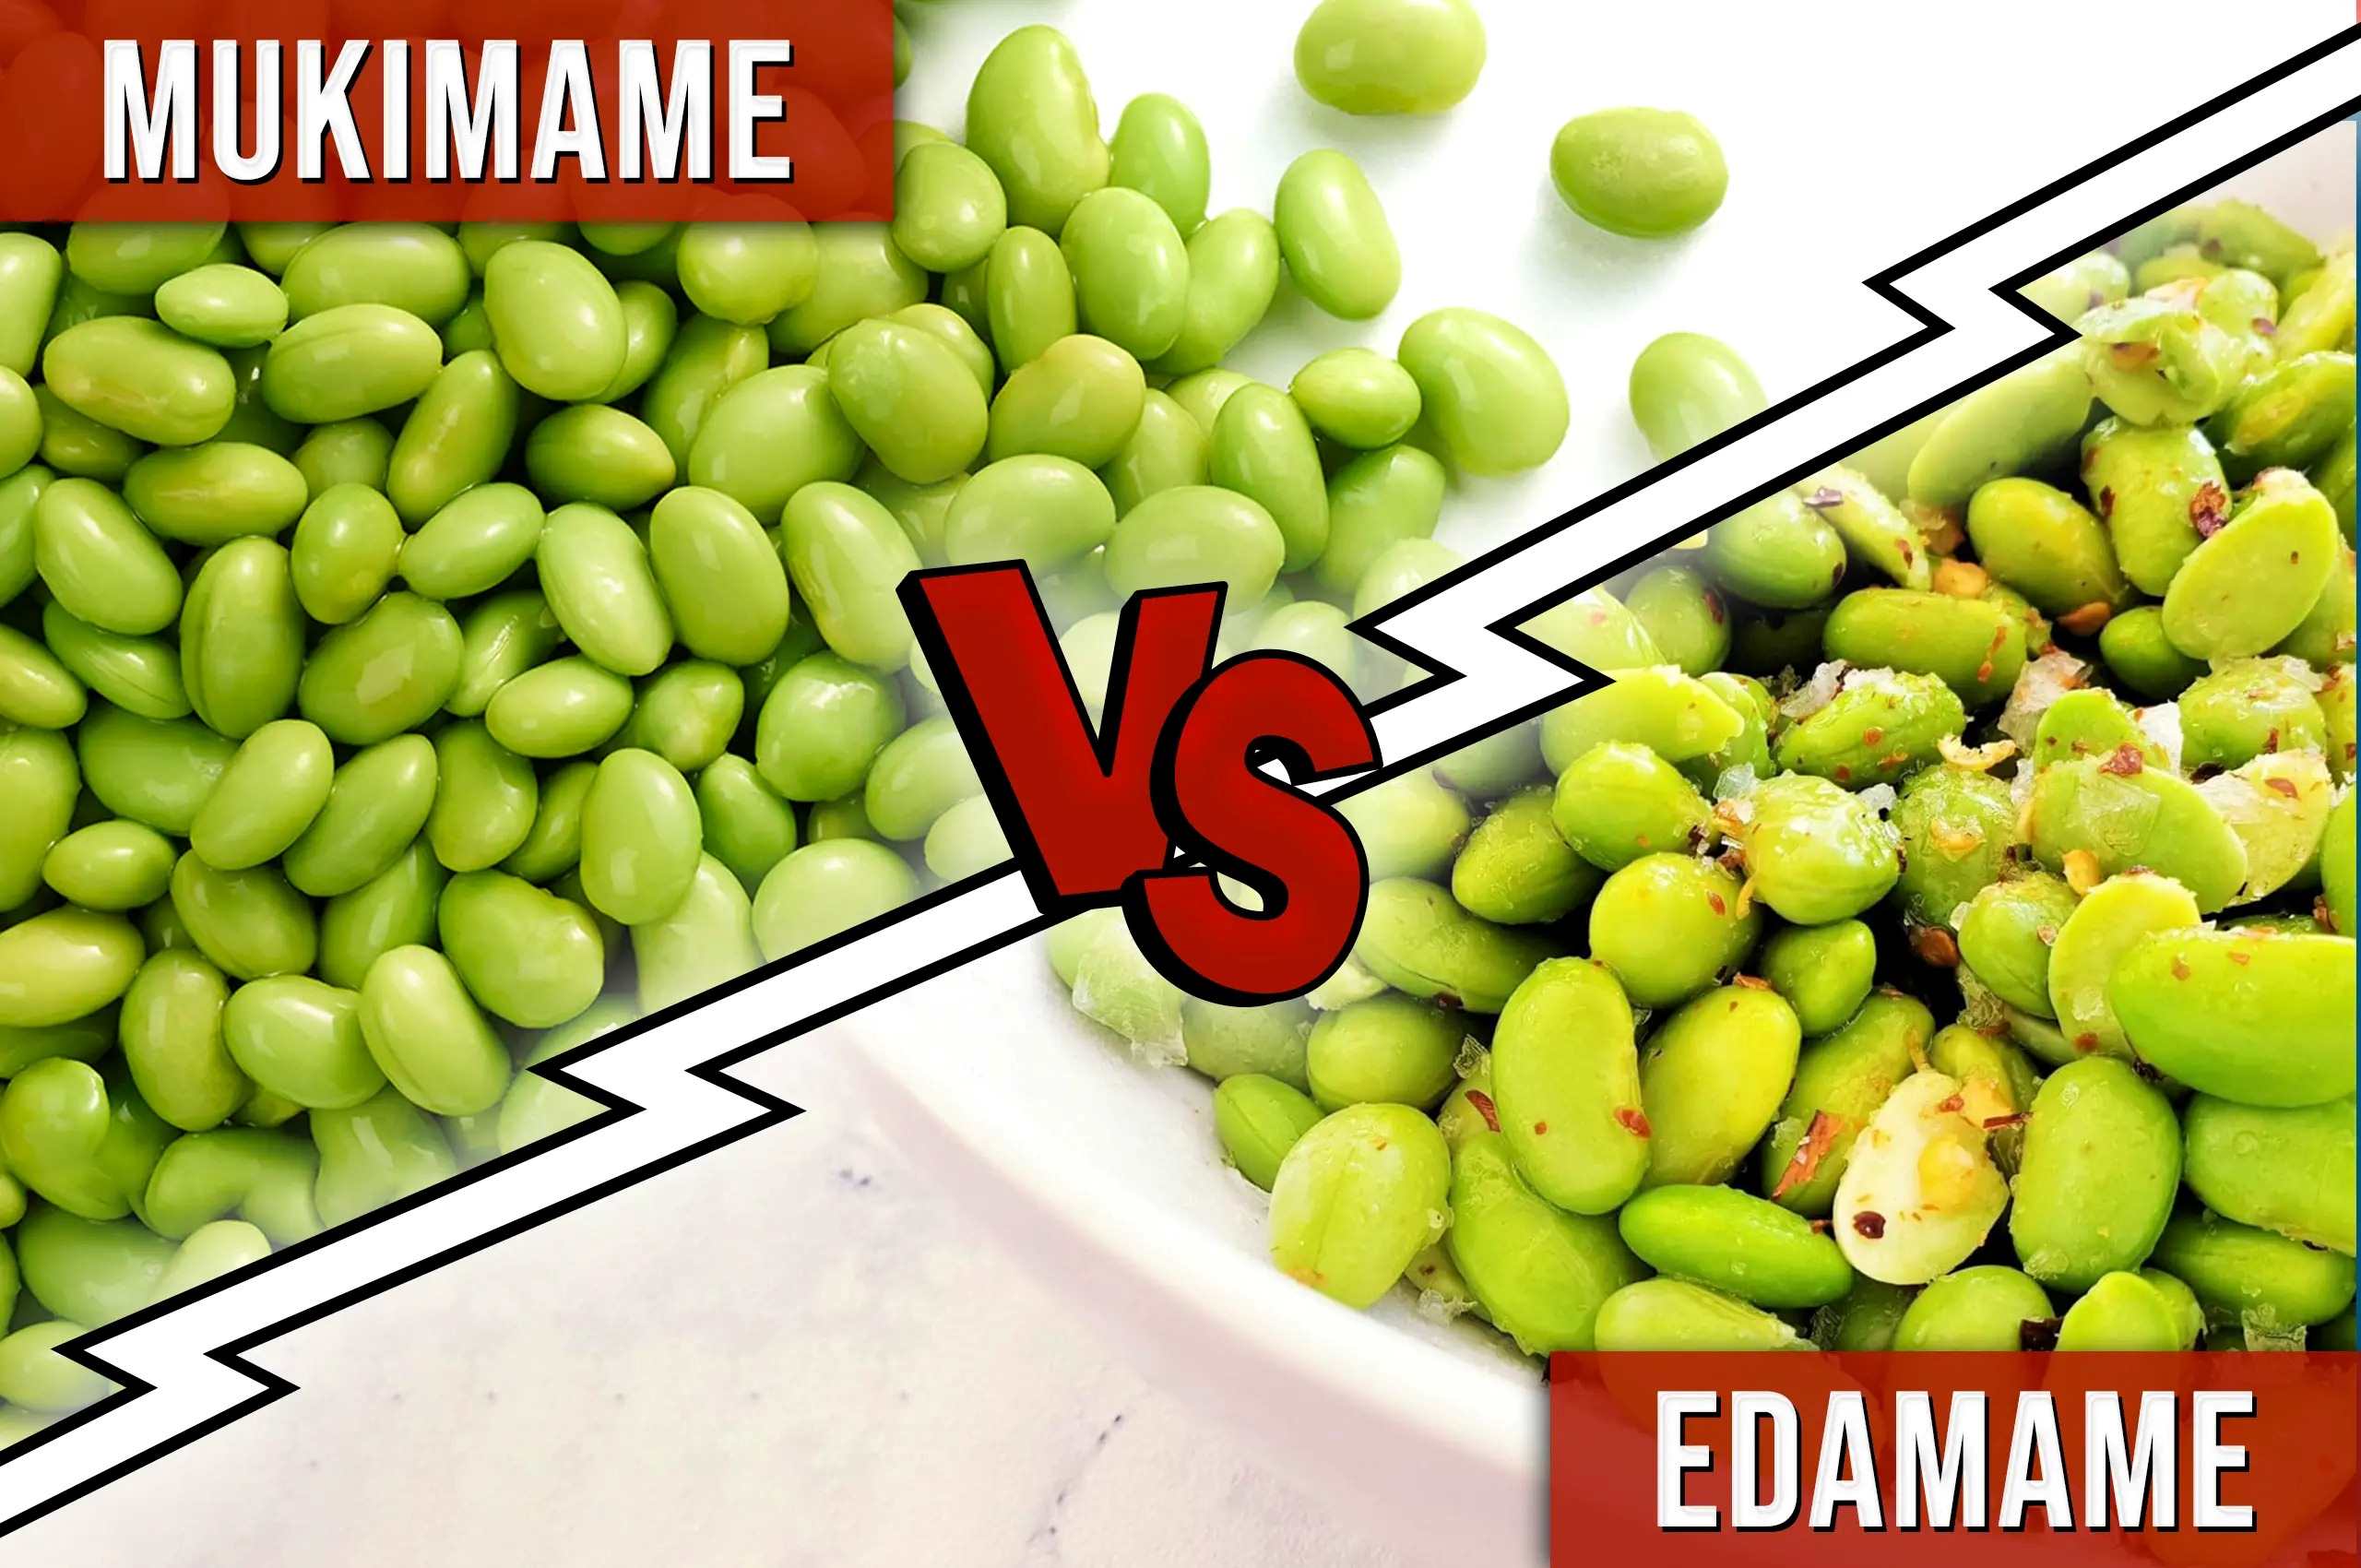 The Surprising Truth About Edamame And Mukimame - Are They Really The Same?